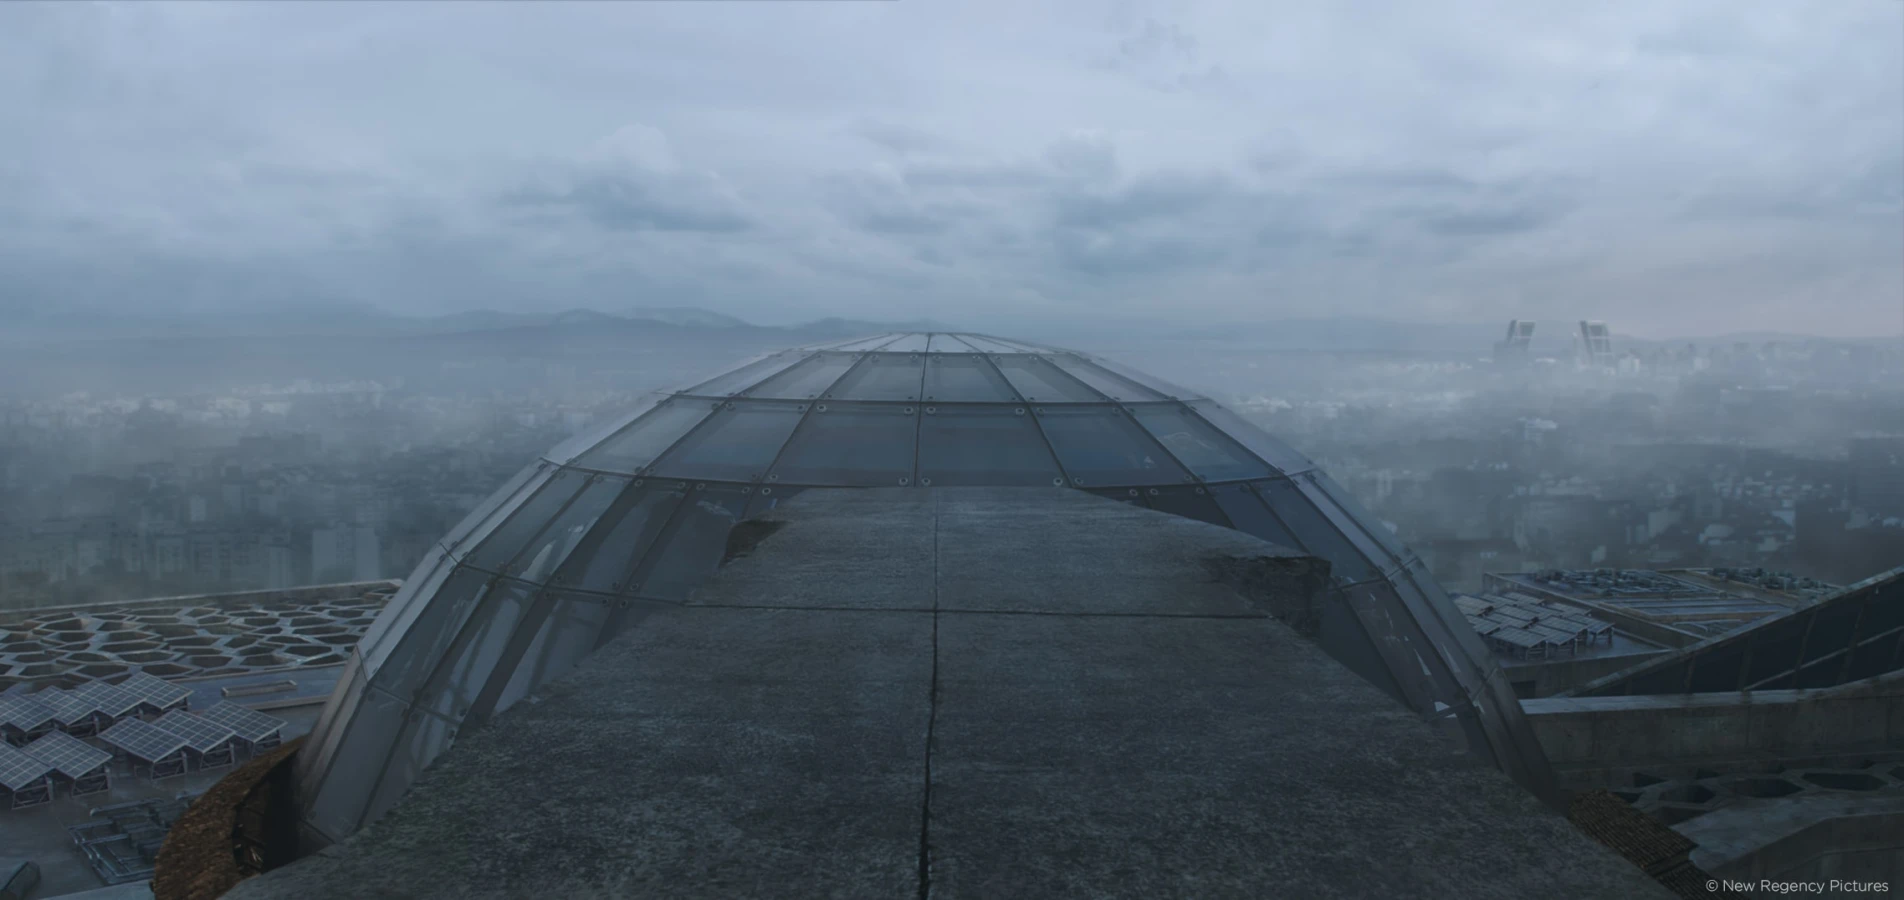  Assassin's Creed dome view Raynault vfx 